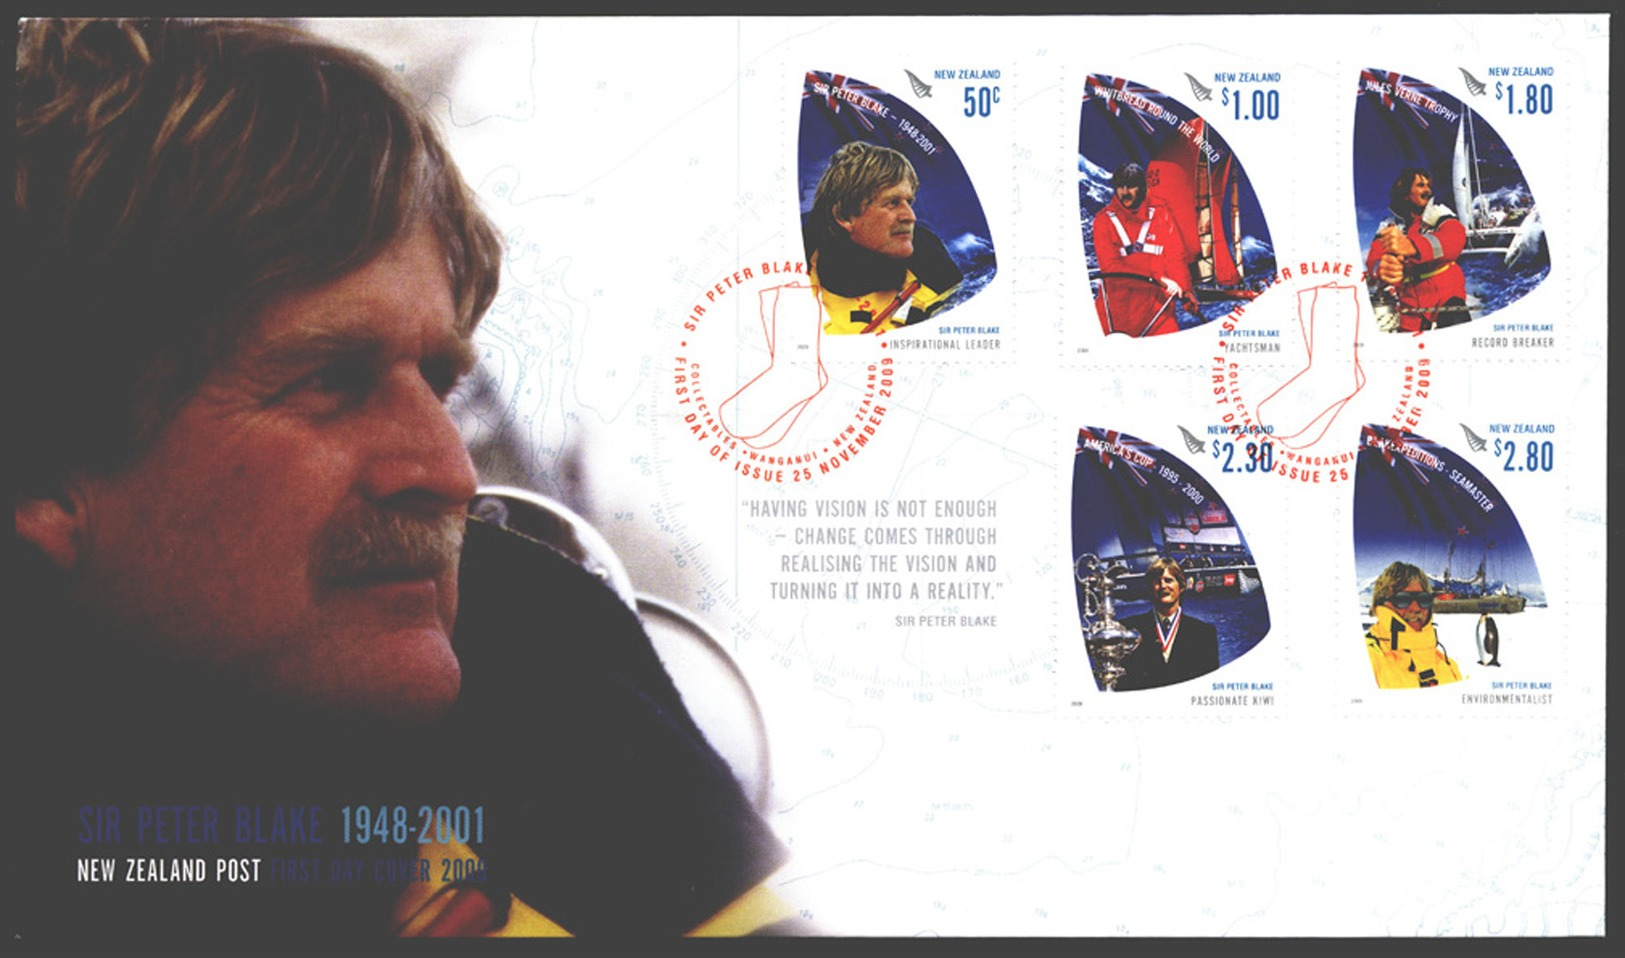 NEW ZEALAND STAMPS, FDC 25 NOV 2009, SIR PETER BLAKE - FDC